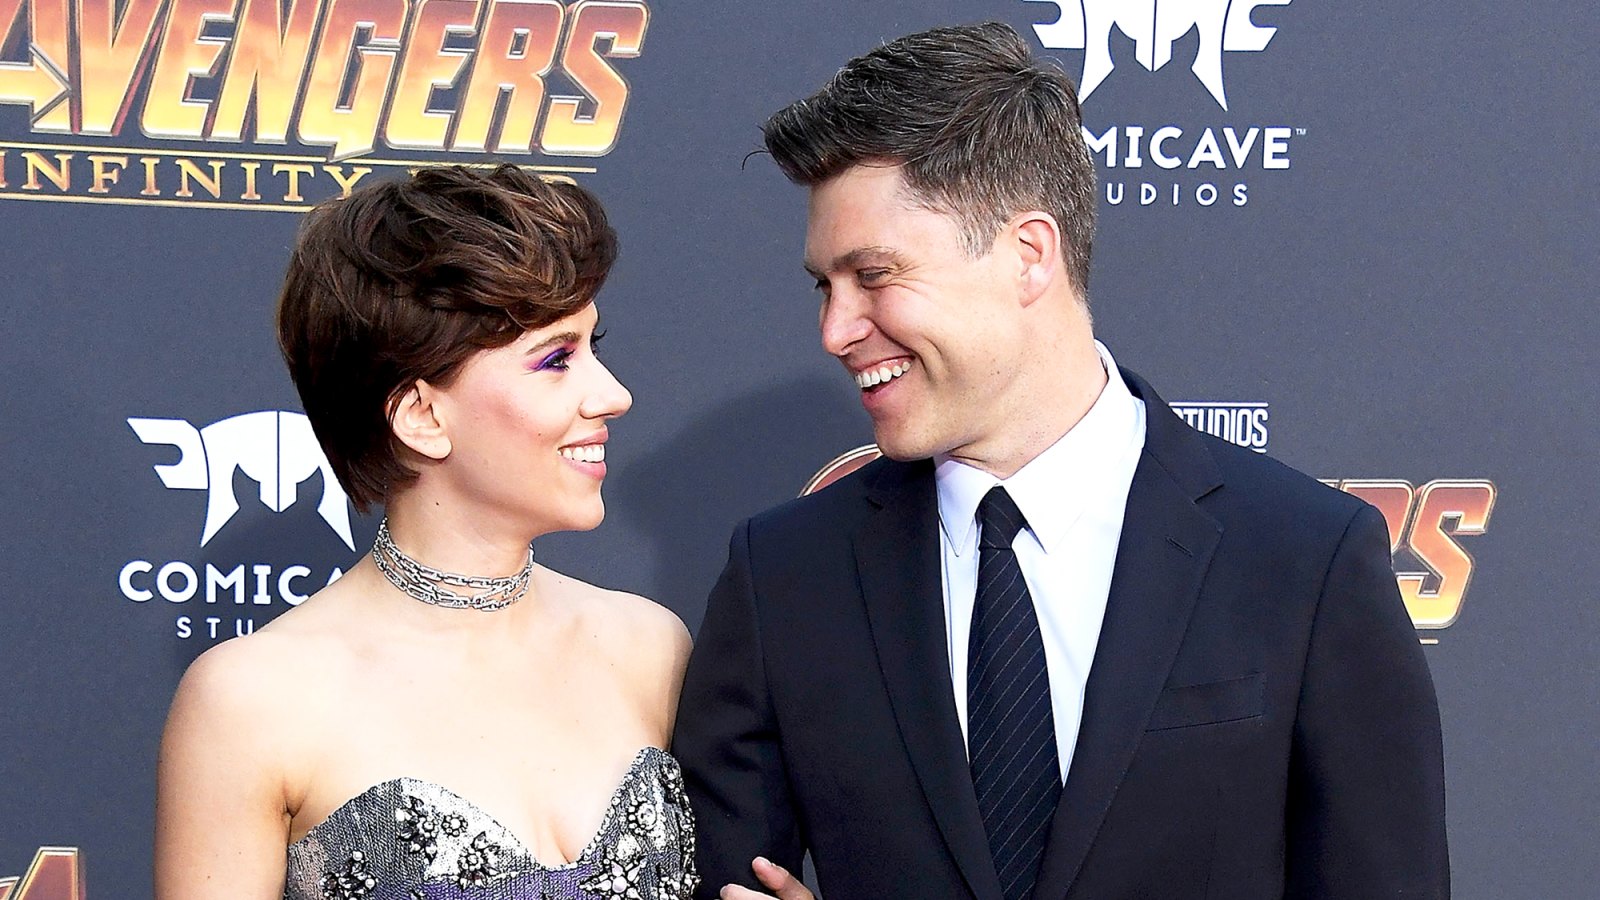 Scarlett Johansson and Colin Jost arrive at the Premiere Of Disney And Marvel's "Avengers: Infinity War" on April 23, 2018 in Los Angeles, California.